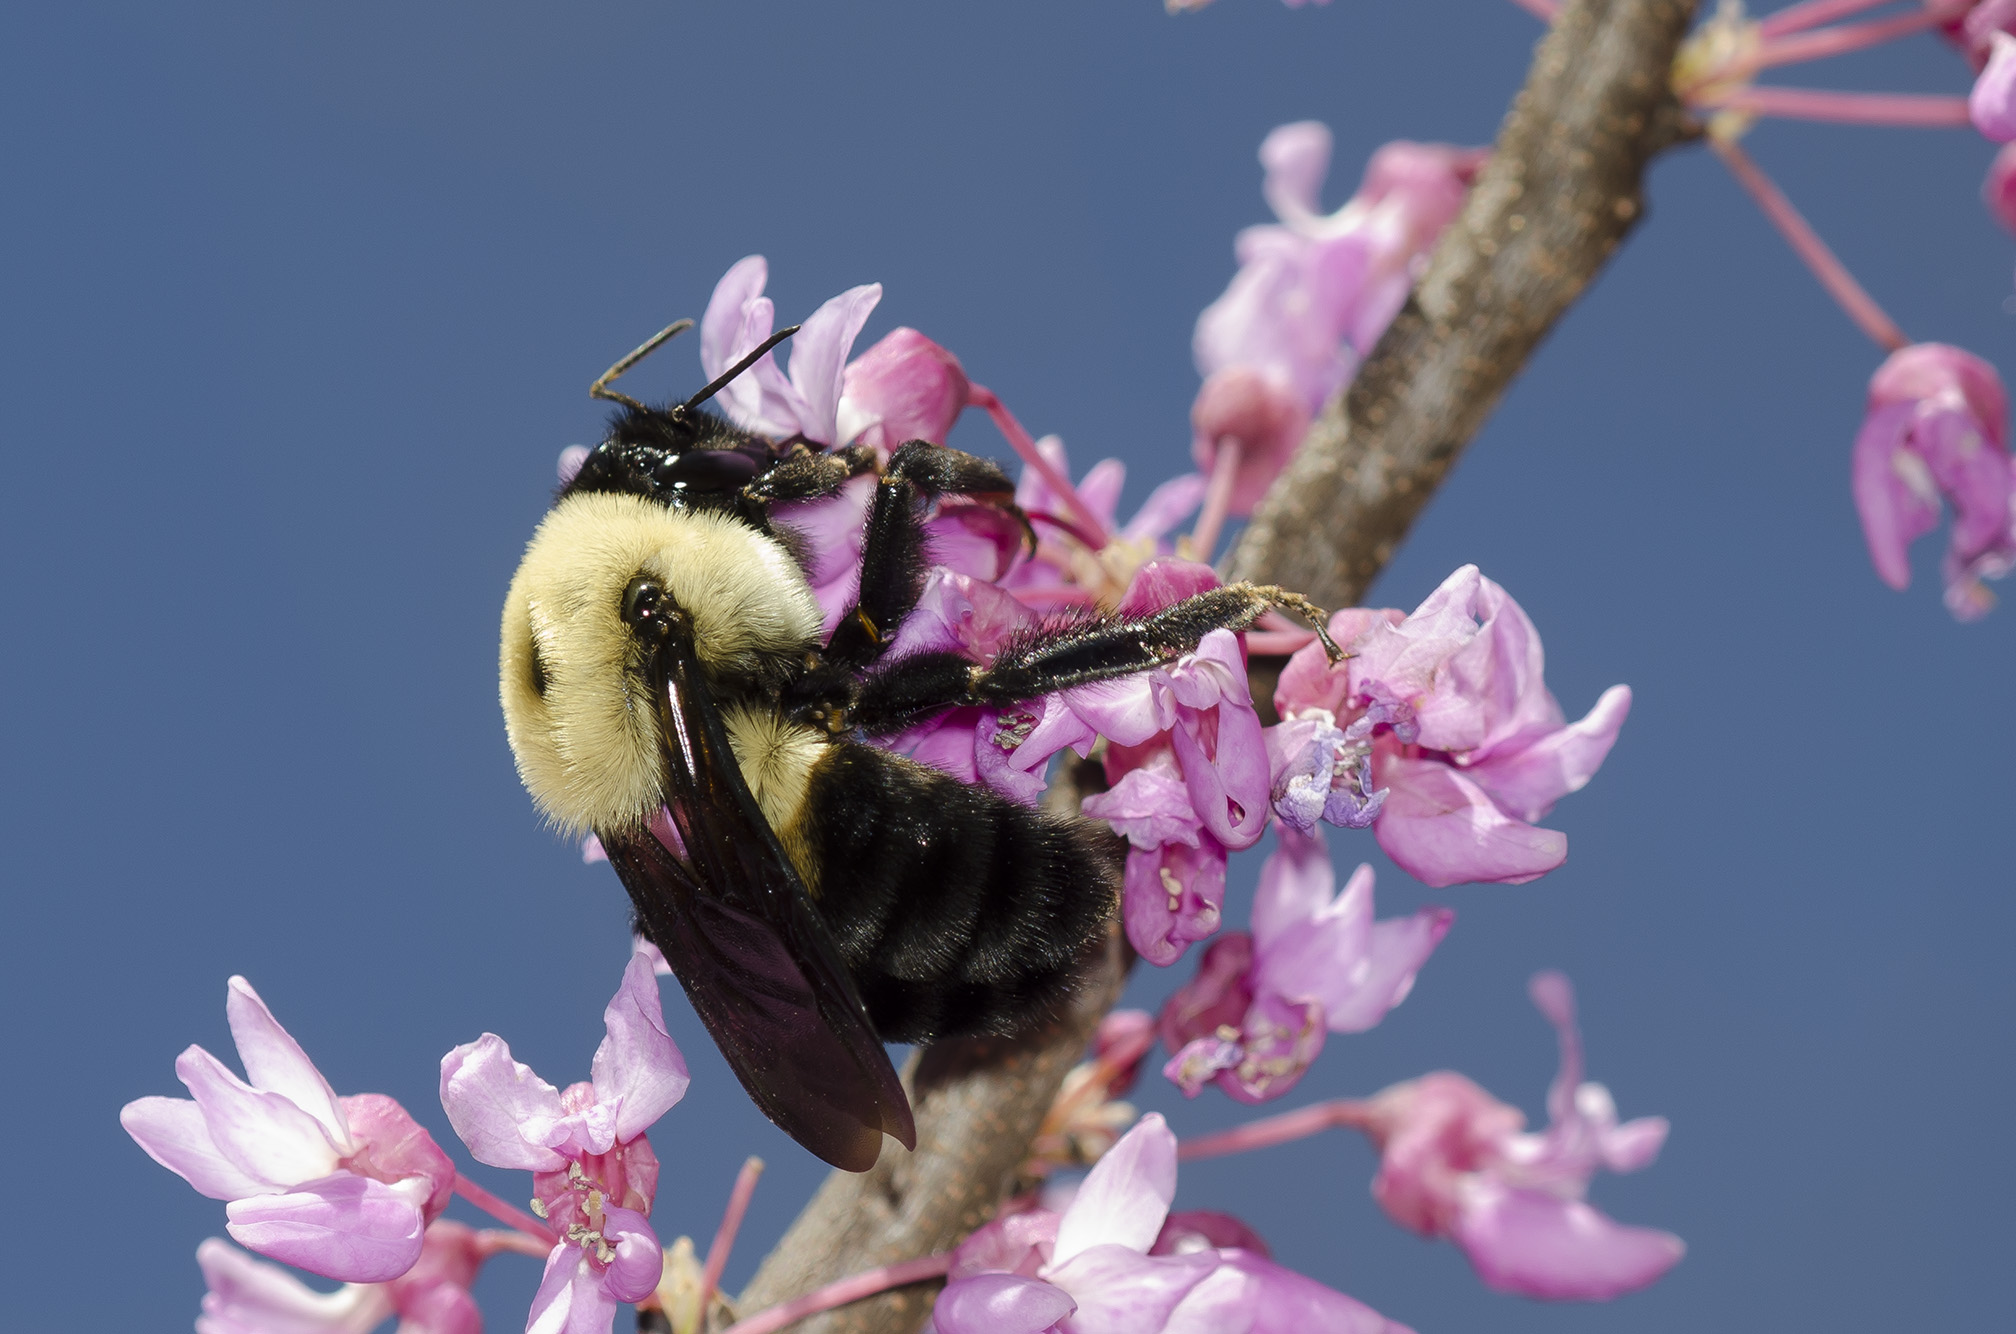 A large and hairy bumble bee curls itself around the pink blossom of redbug as it drinks nectar. The bumble has a black head, with the front half of it's body yellow and the rear part black.